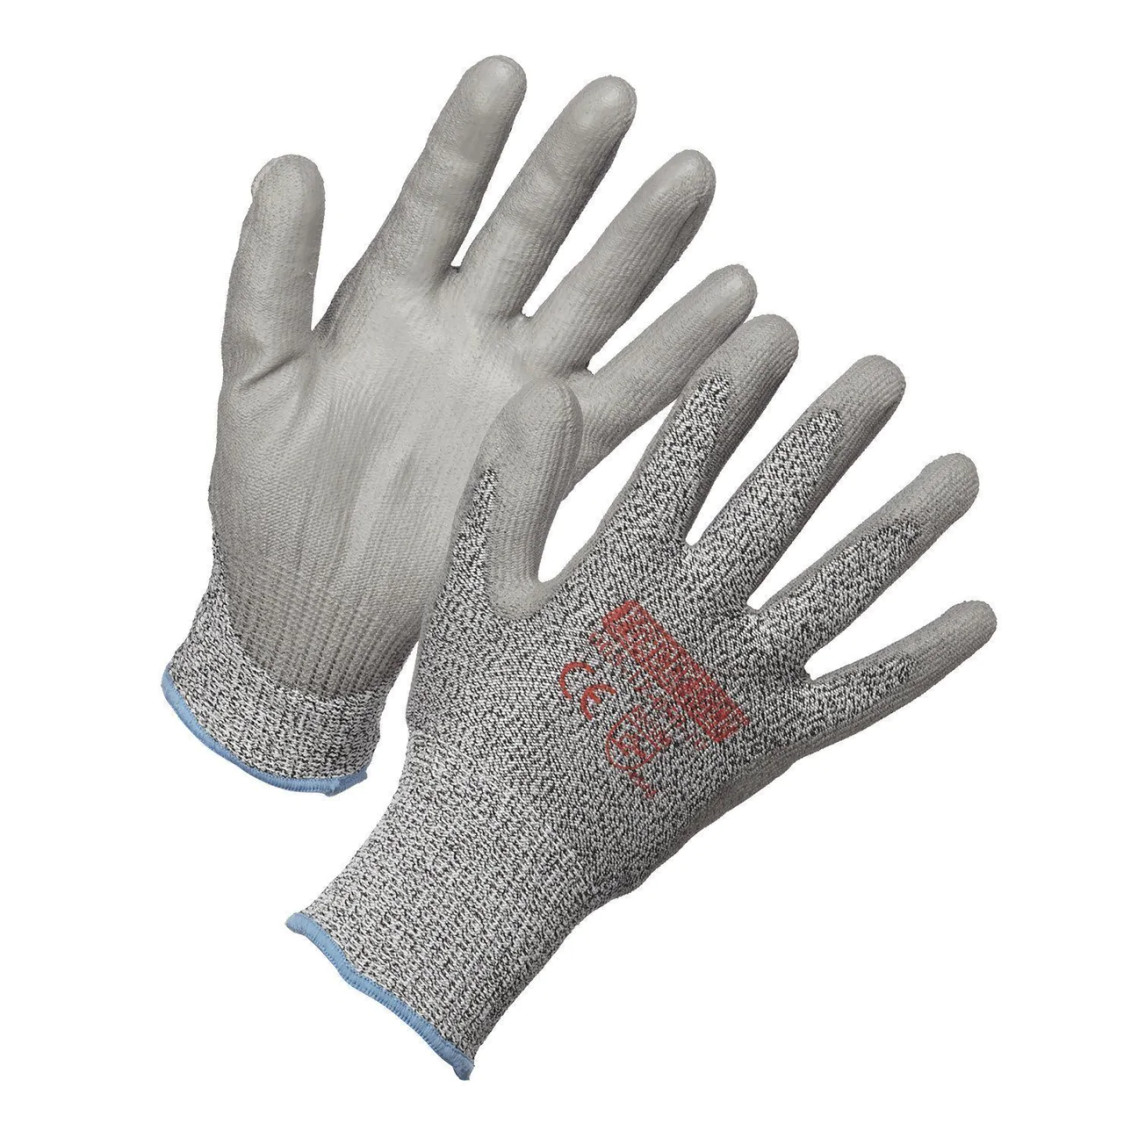 Forcefield Level 5 Cut Resistant HPPE Gloves (12 Pairs/Box) | SafetyApparel.ca